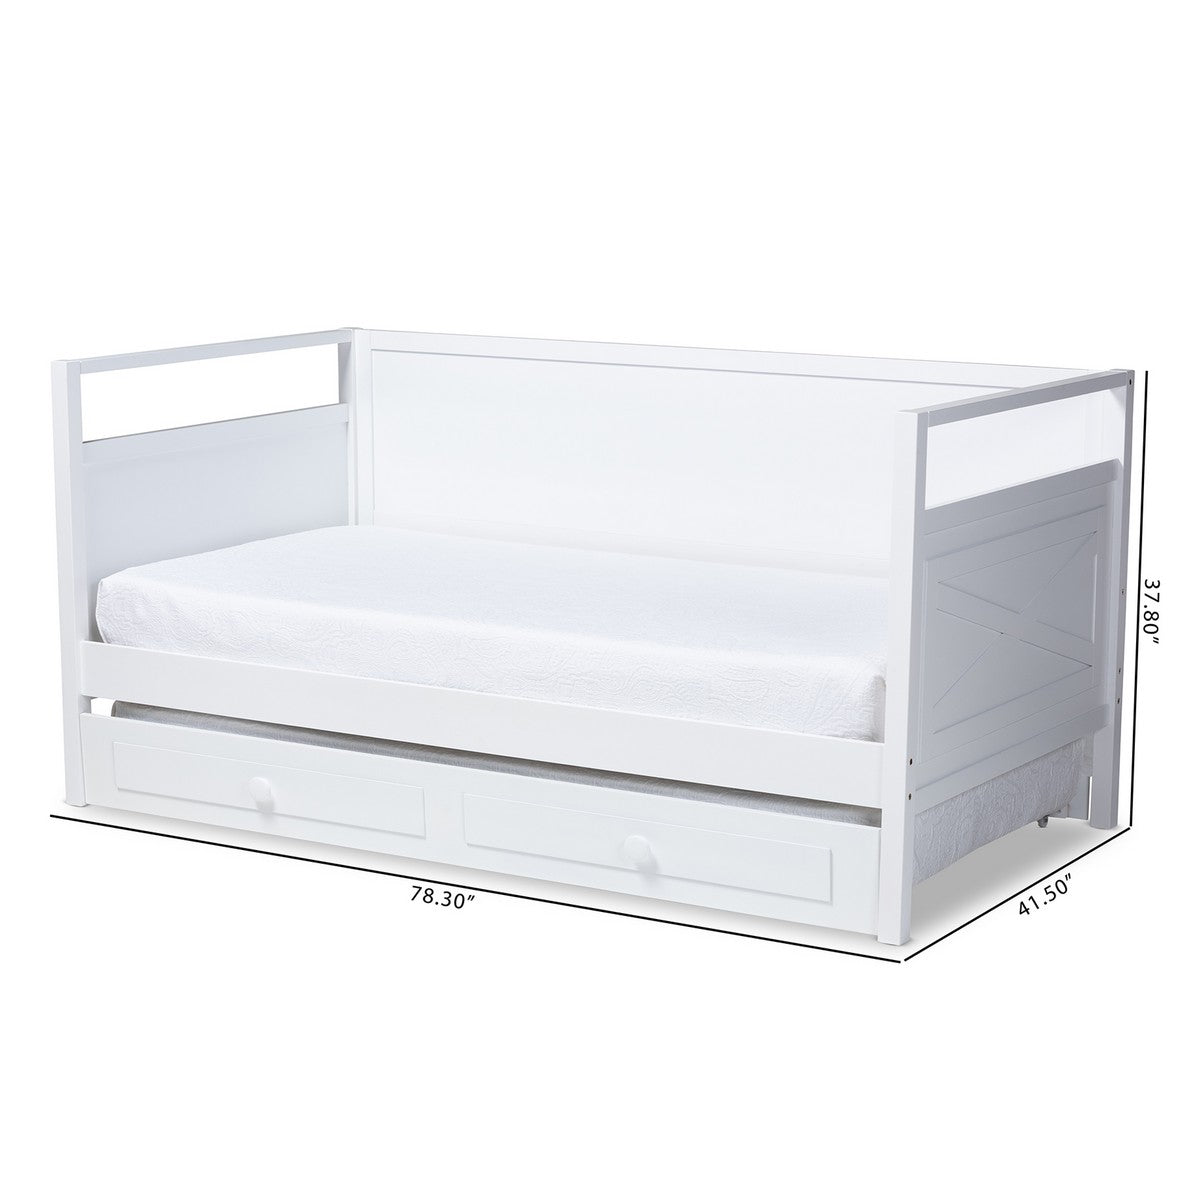 Baxton Studio Cintia Cottage Farmhouse White Finished Wood Twin Size Daybed with Trundle